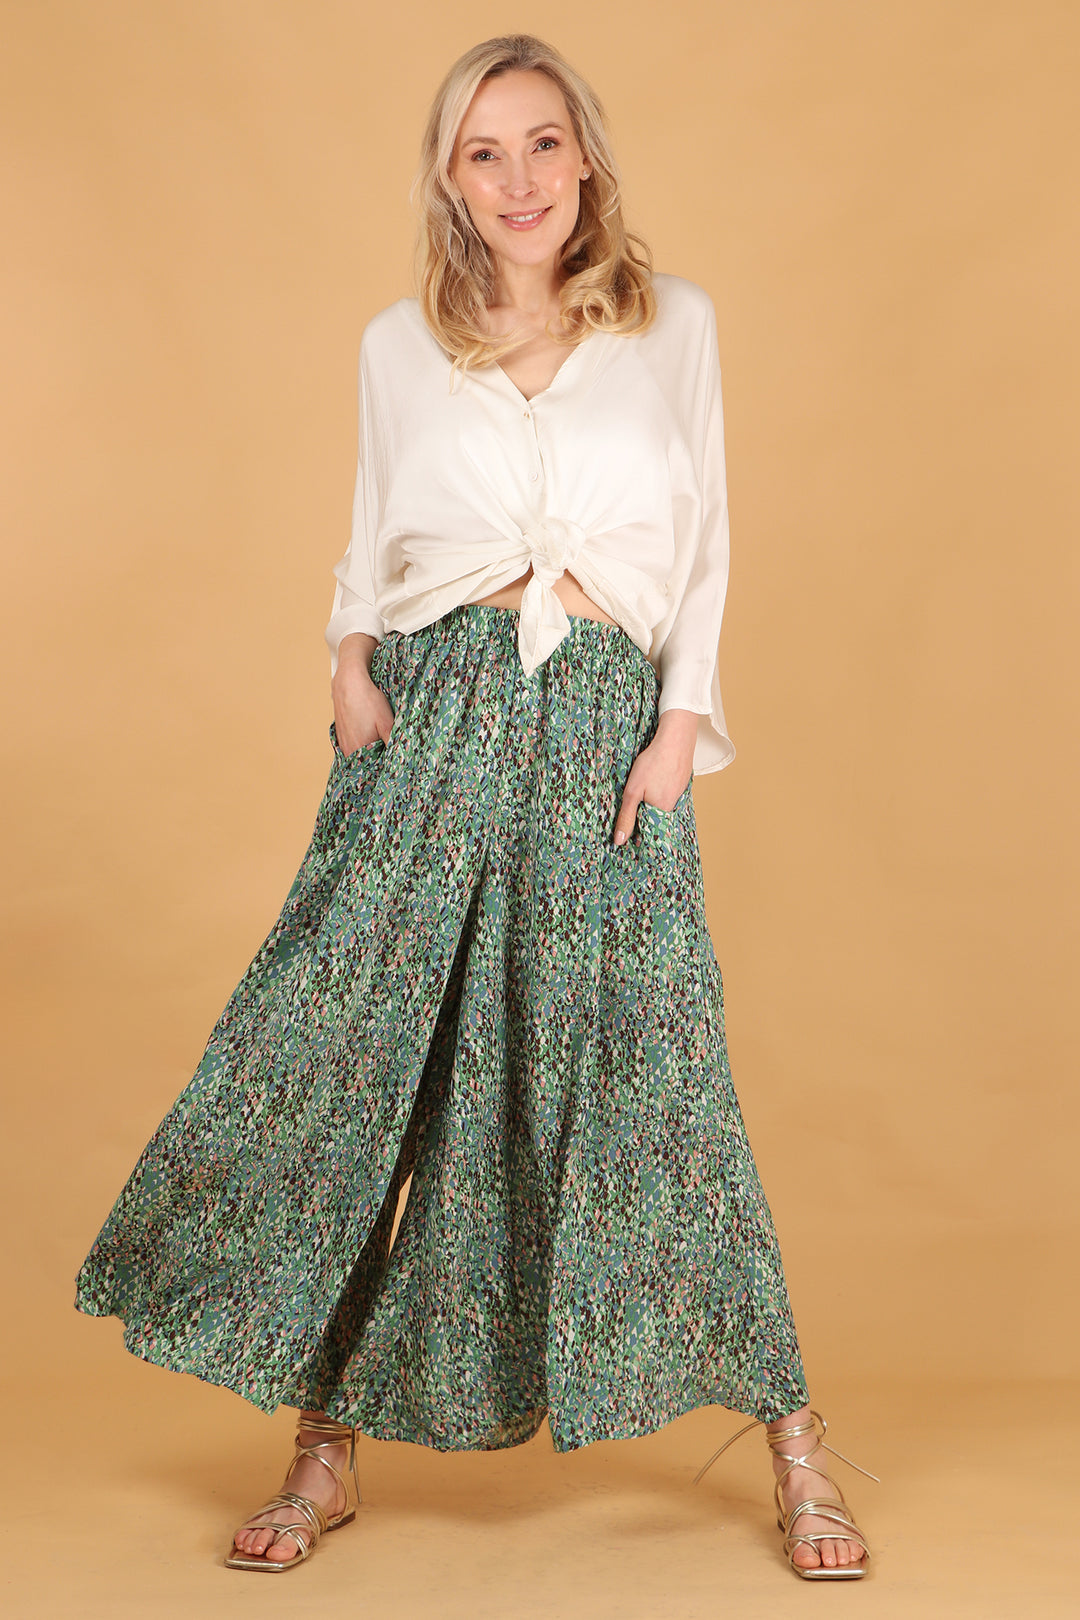 model showing that the palazzo pants have pockets